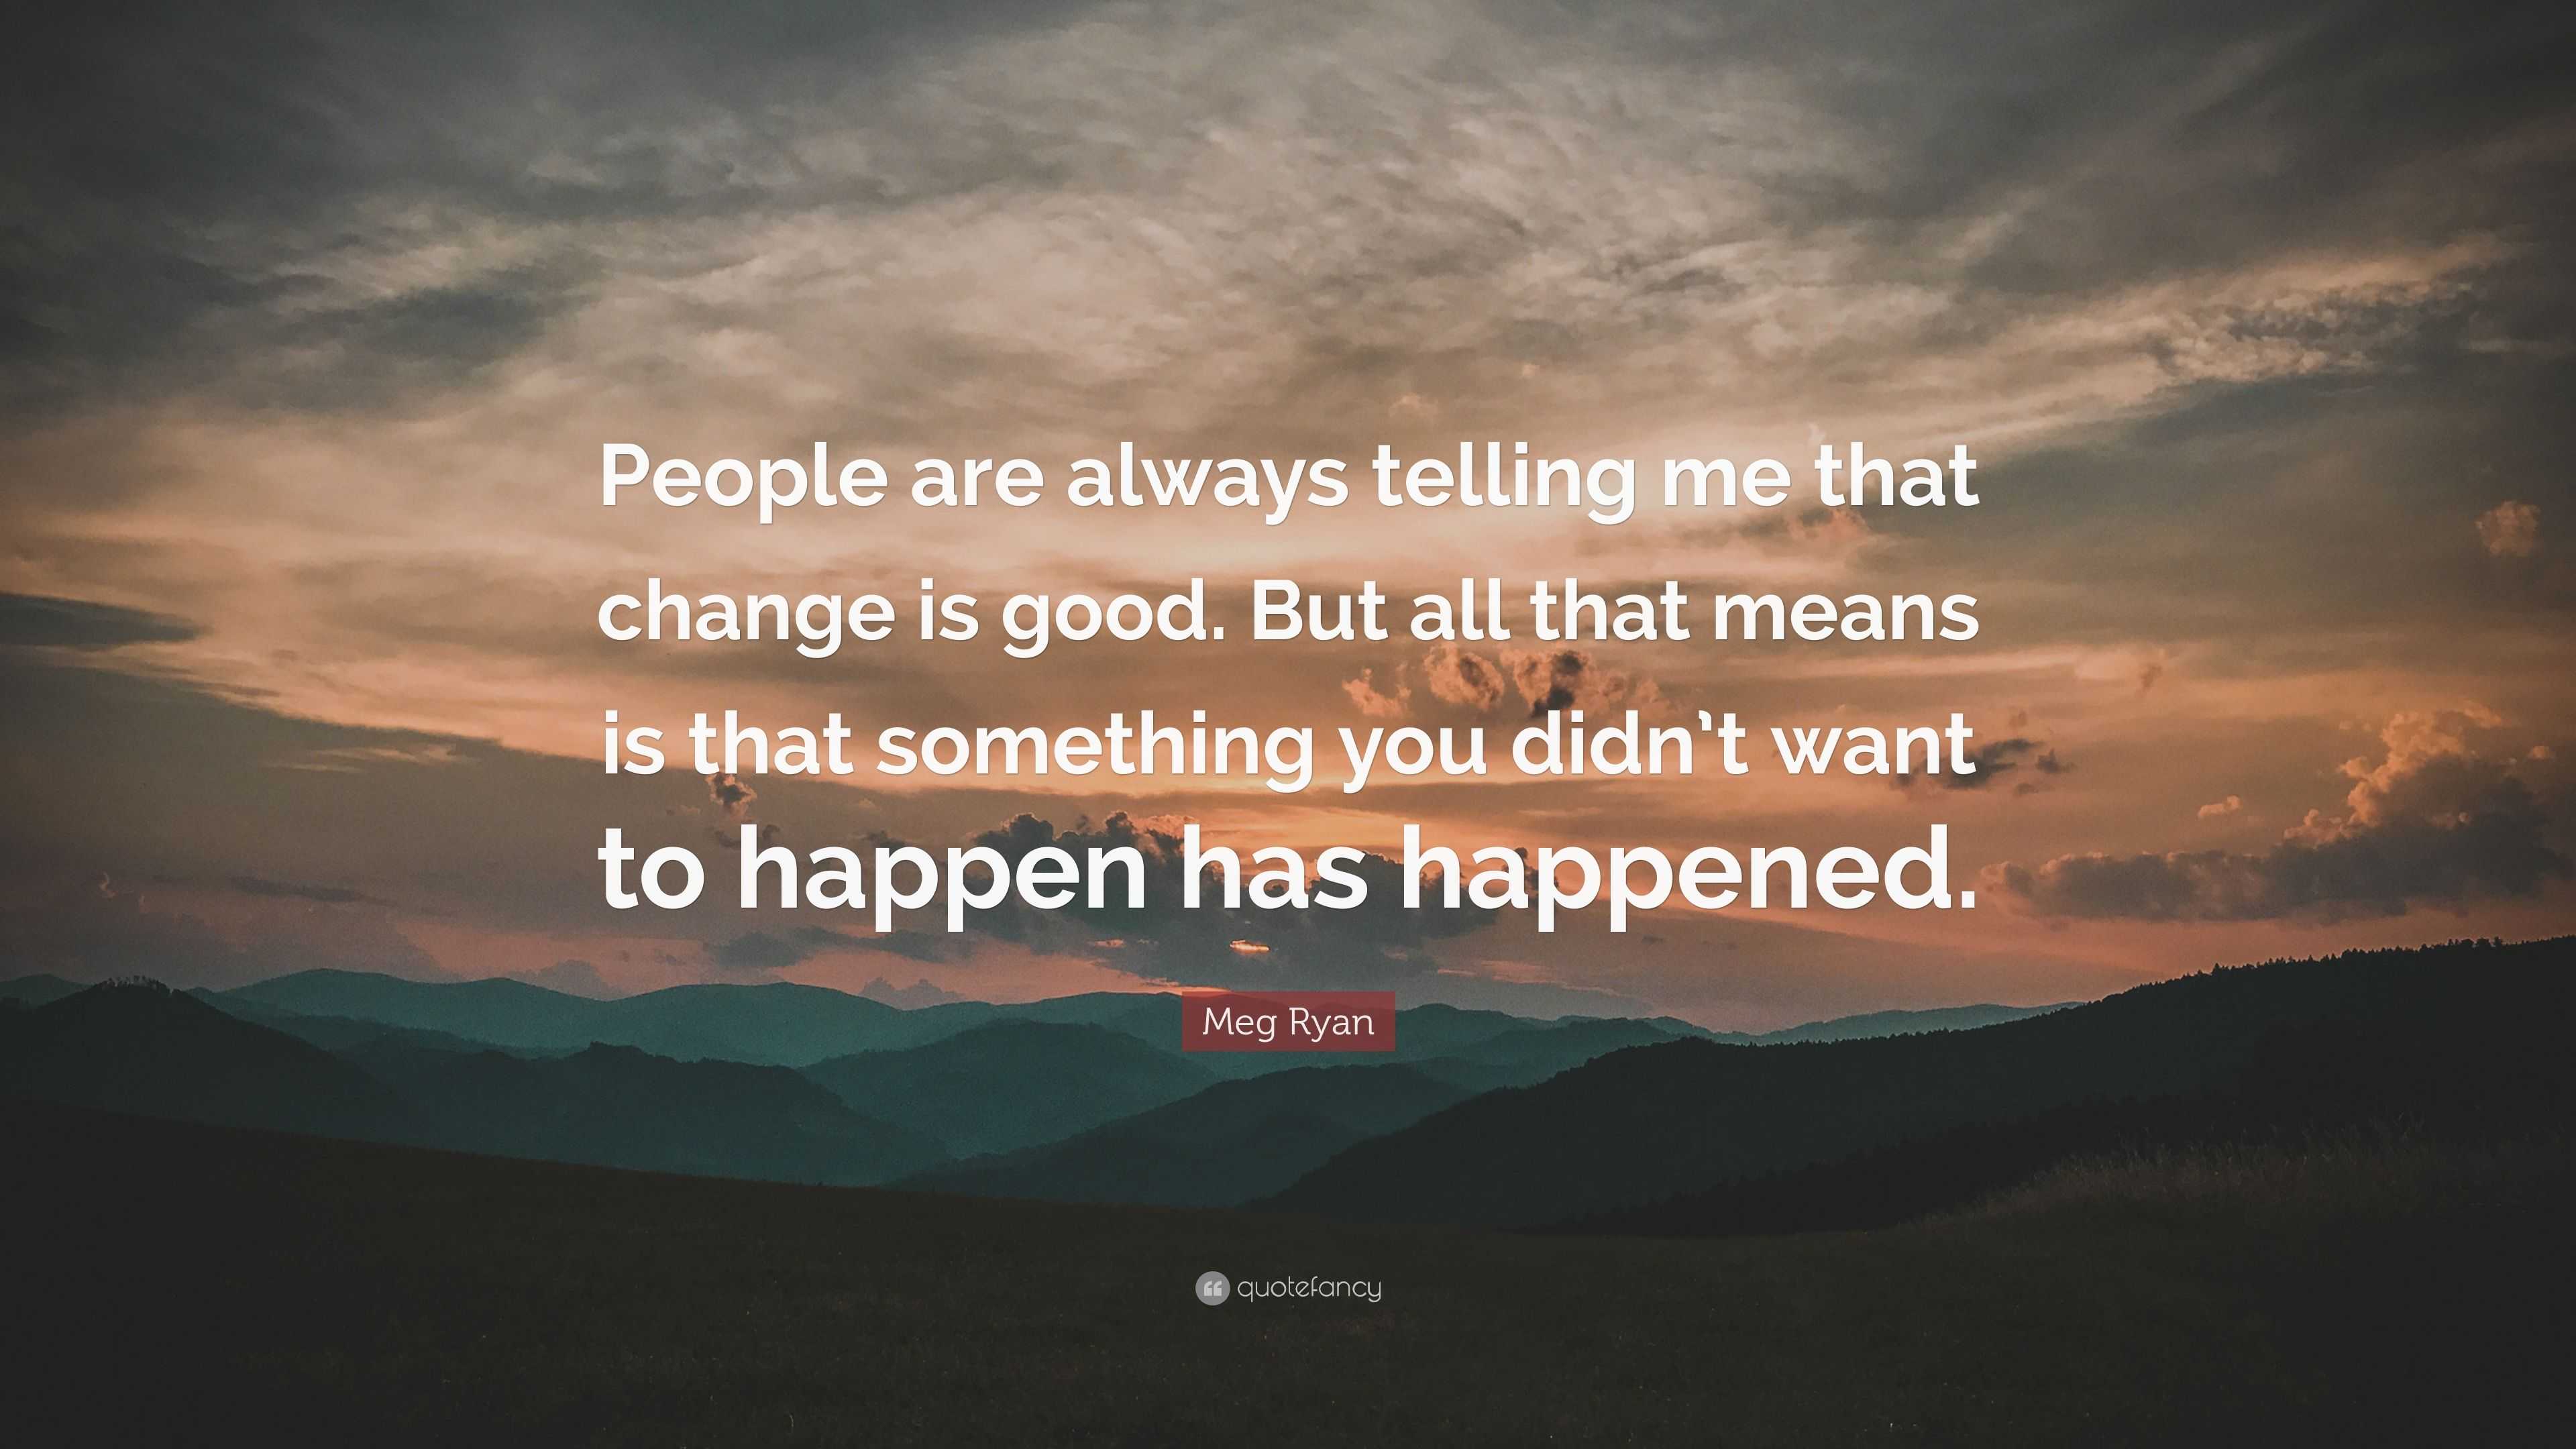 Meg Ryan Quote: “People are always telling me that change is good. But ...